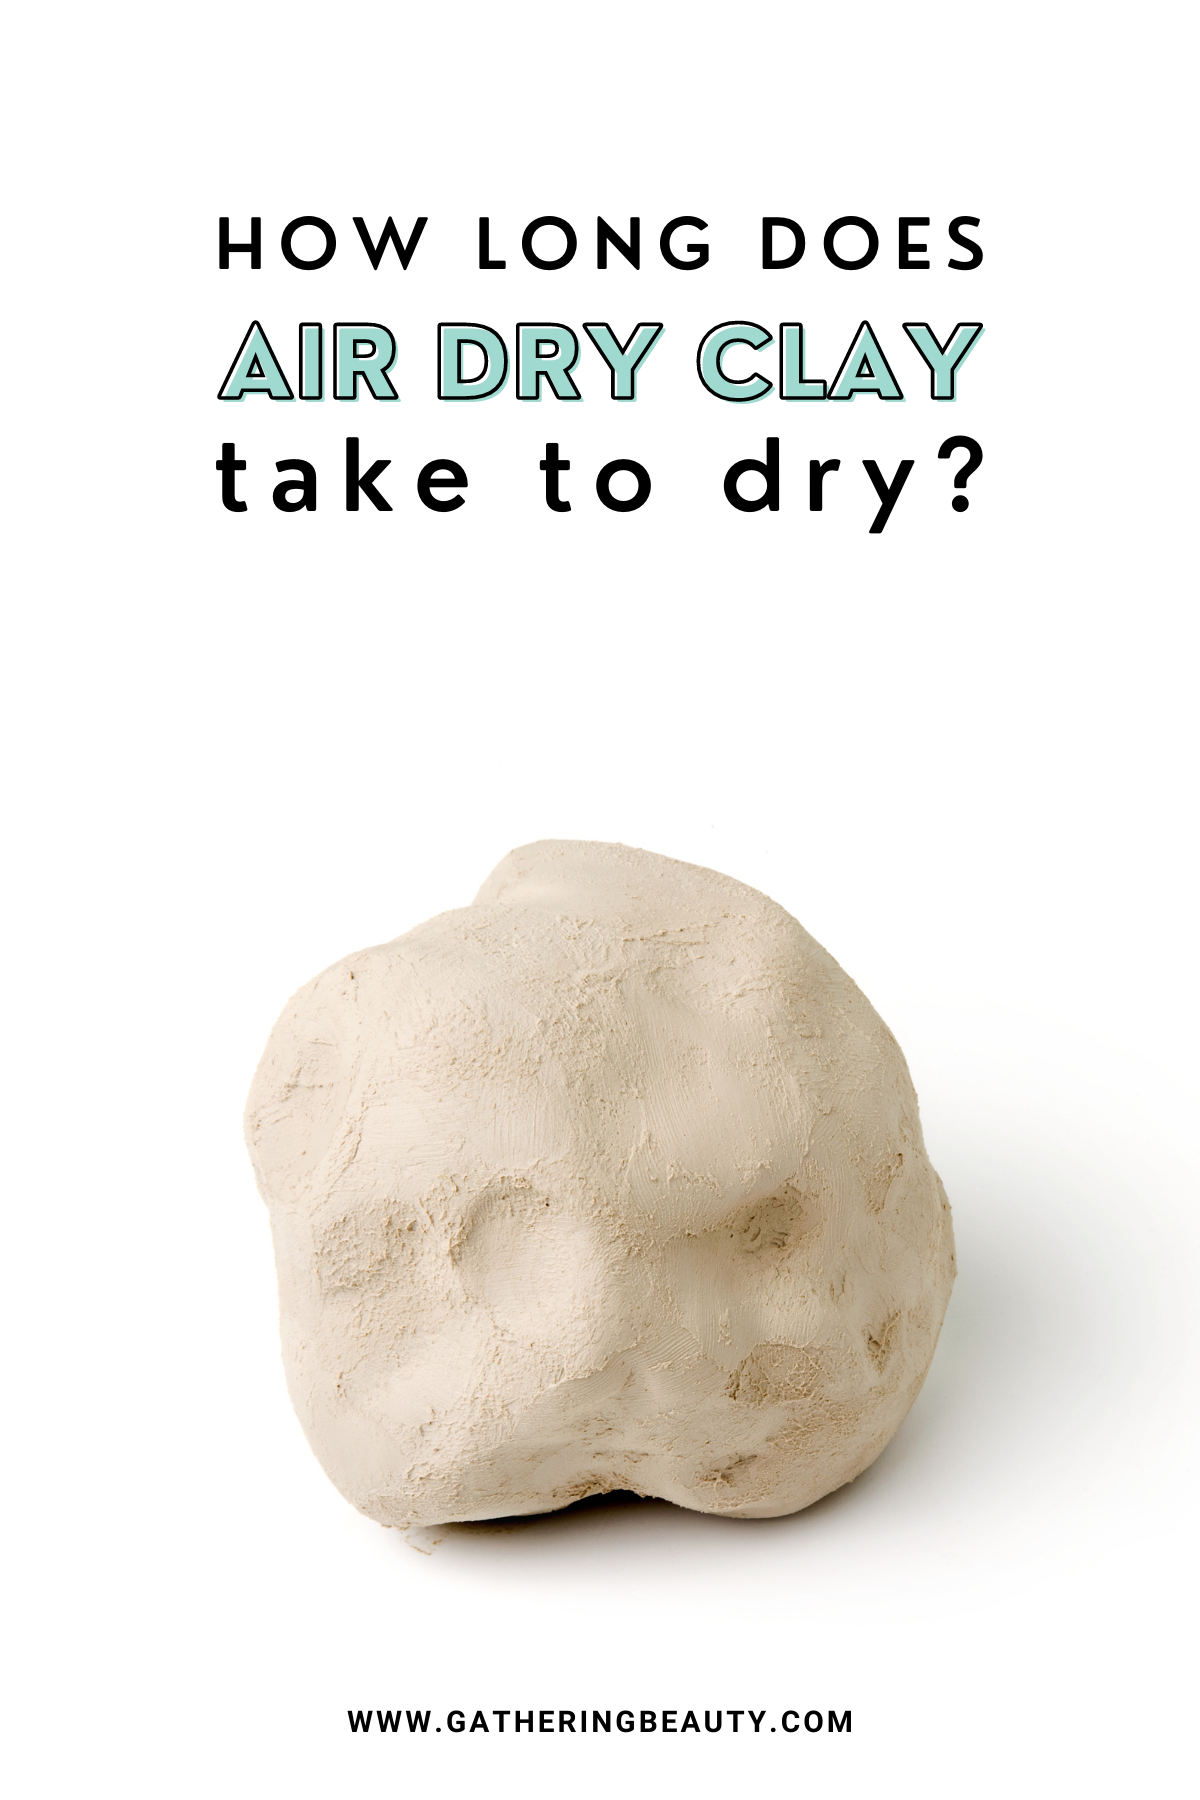 Air Dry Clay Vs Polymer Clay: What's The Difference?